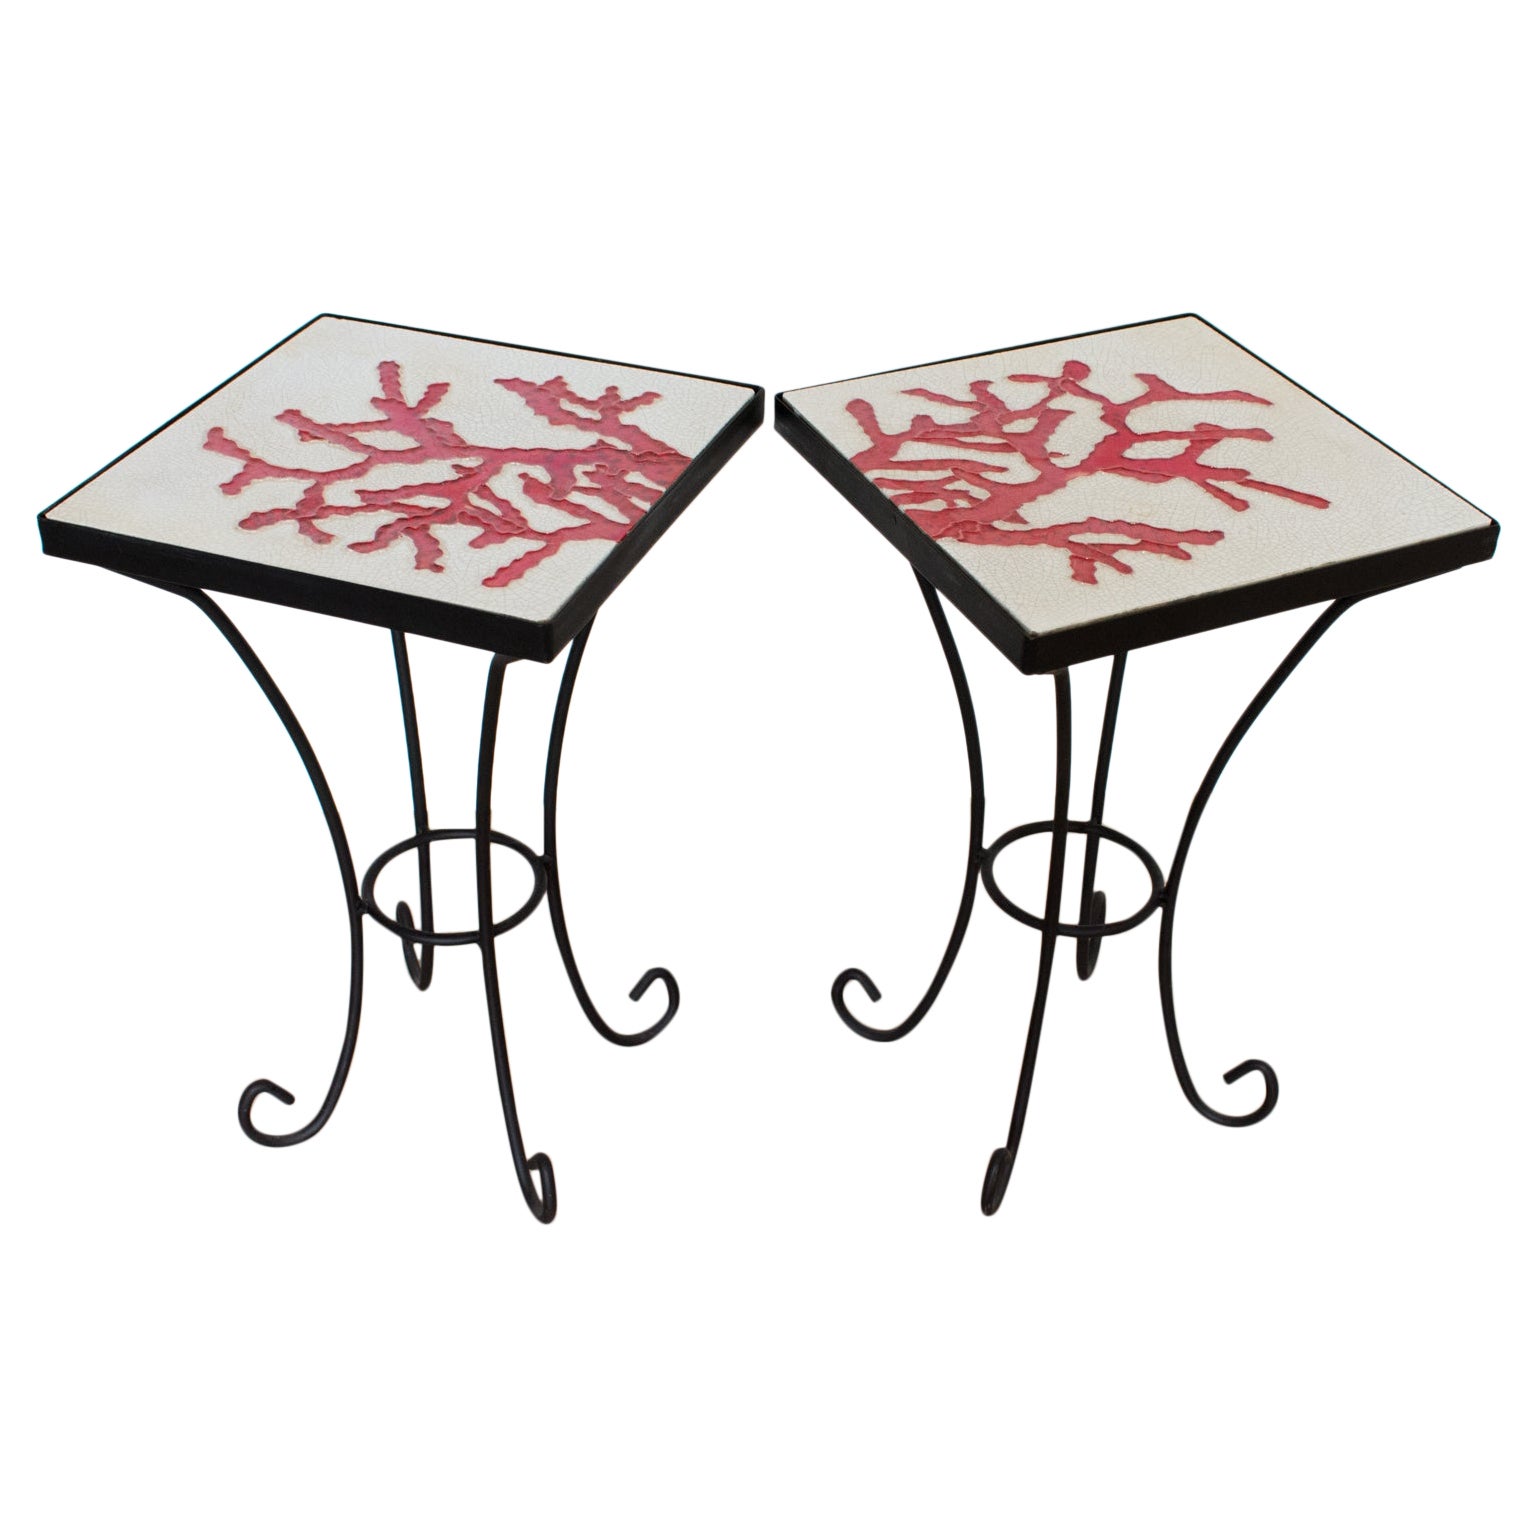 Wrought Iron and Ceramic Tile Side Coffee Table, a pair, 1950s